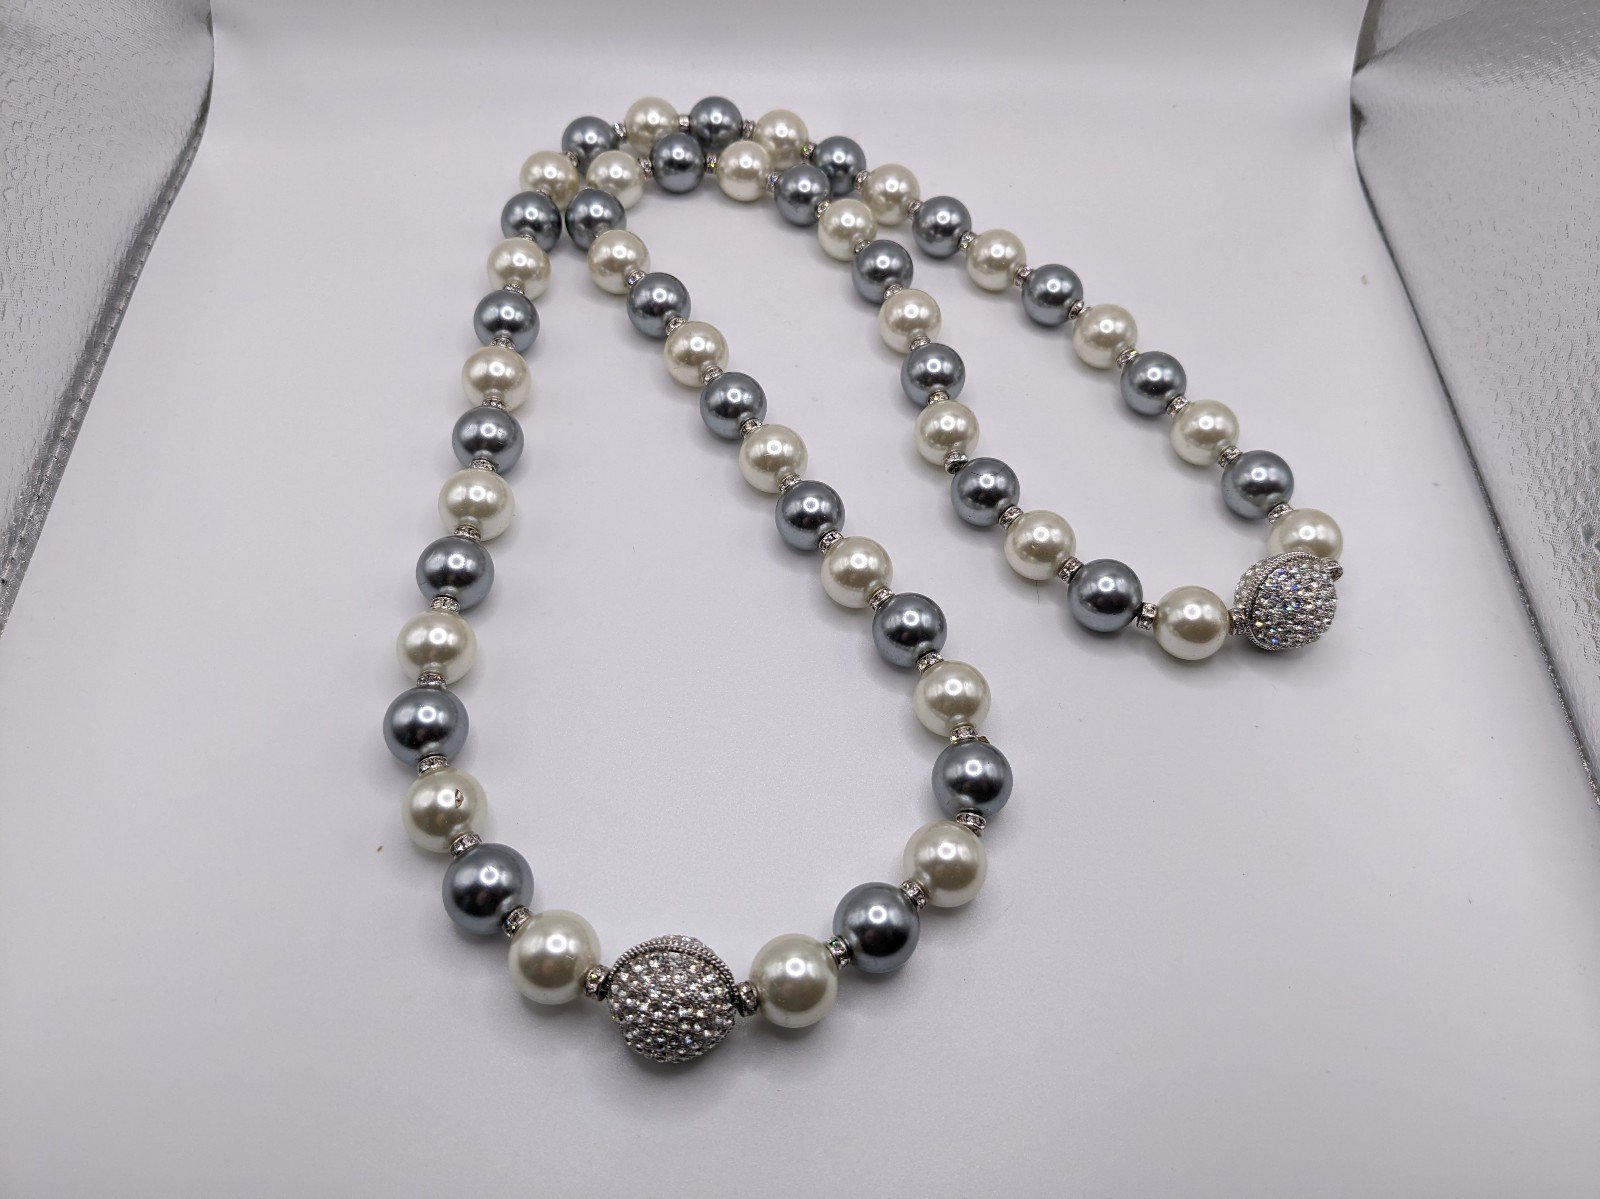 Avon Faux White and Gray Pearl Statement Necklace 97o1d